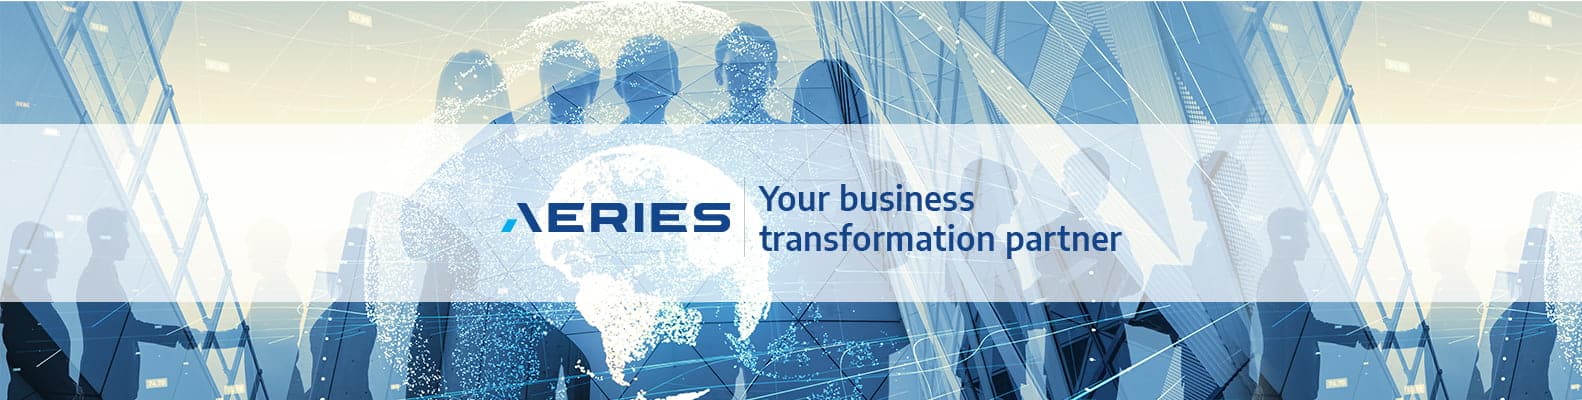 Aeries technology introduces new logo